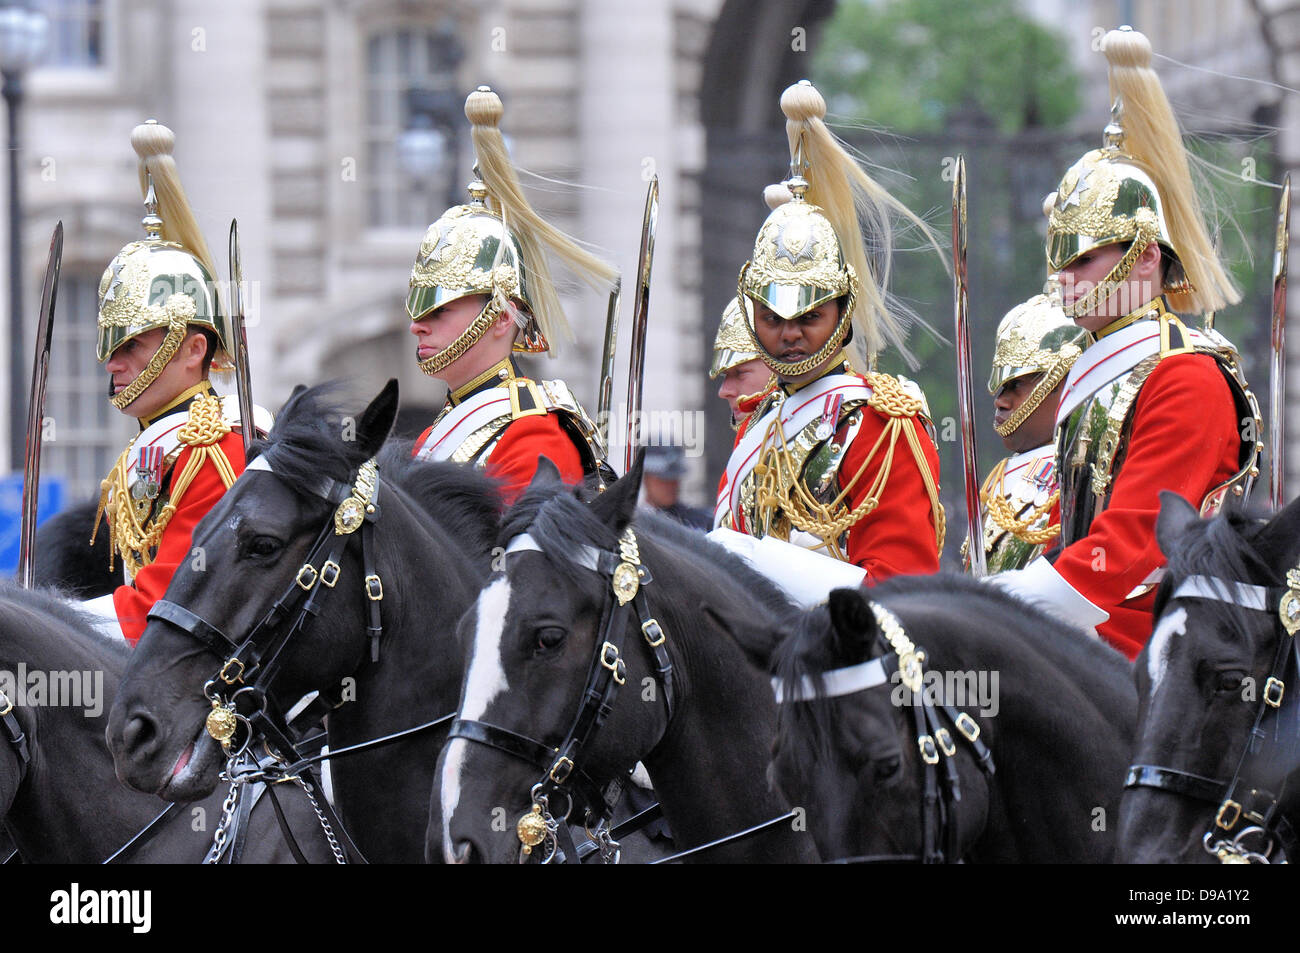 Trooping the Colour taking place along The Mall and Buckingham Palace, London, UK. Ceremonial military soldier. Household Cavalry mounted Stock Photo